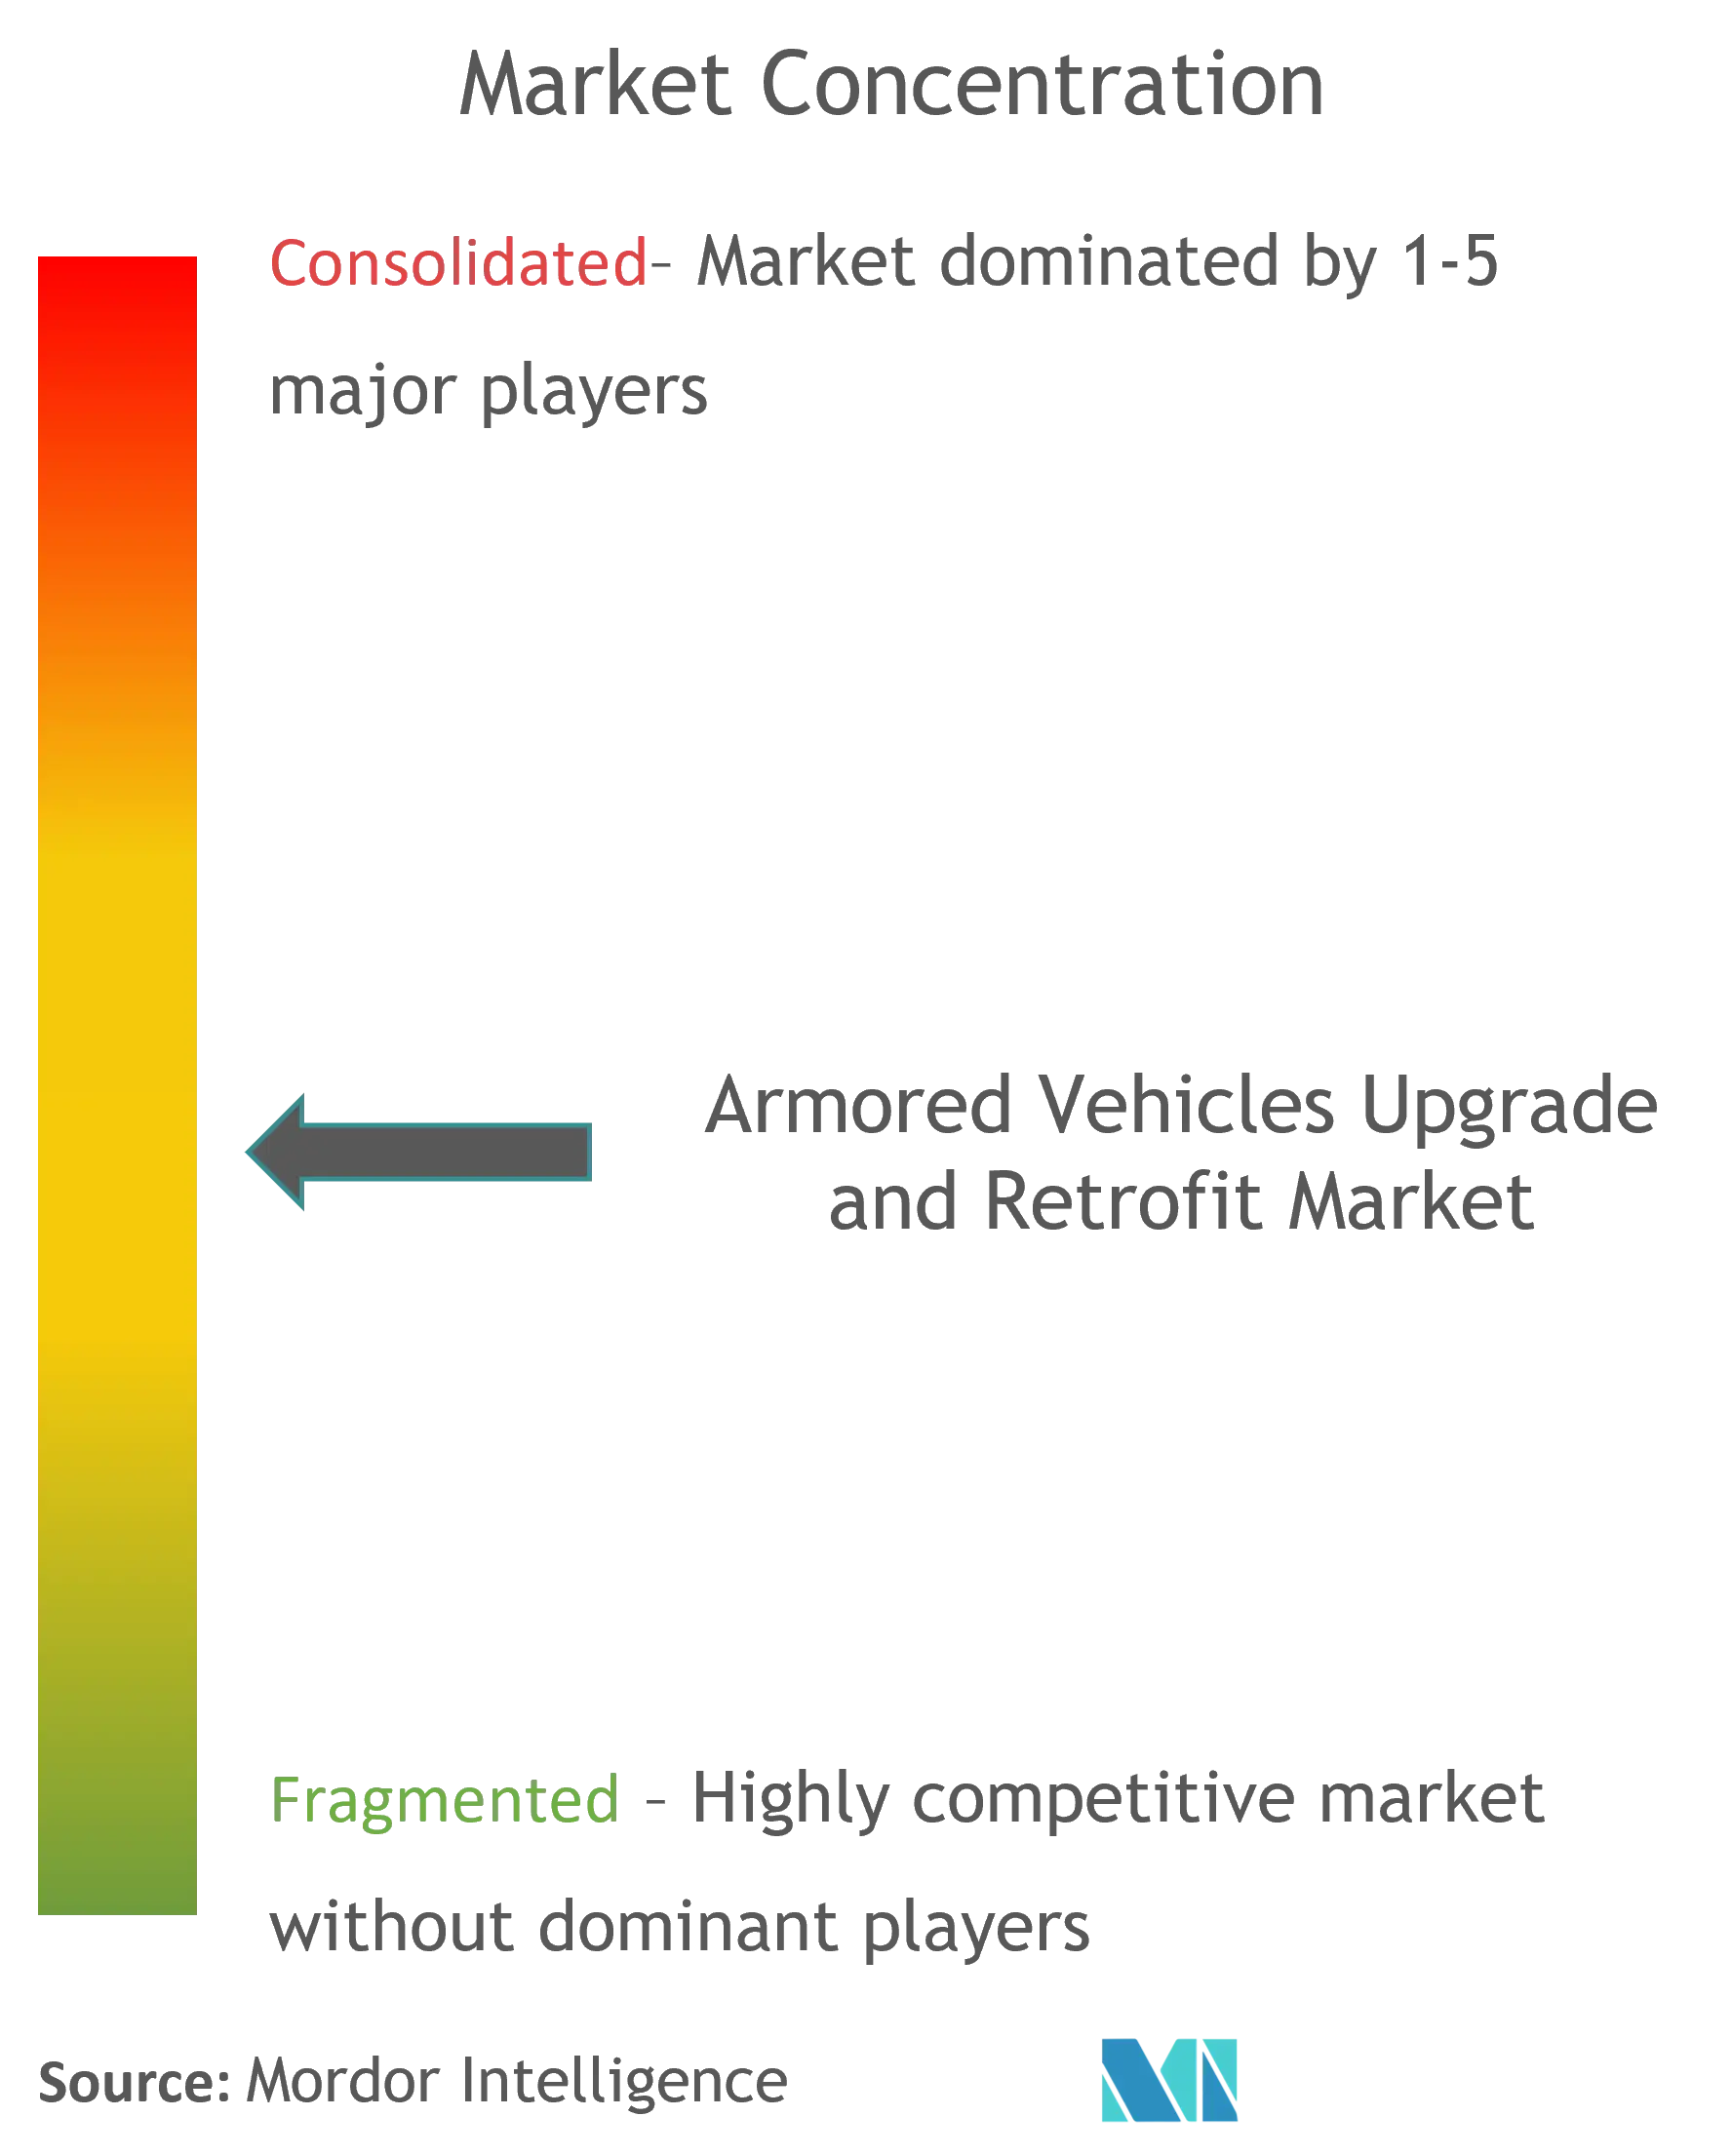 armored vehicle upgrade and retrofit market updated CL.png